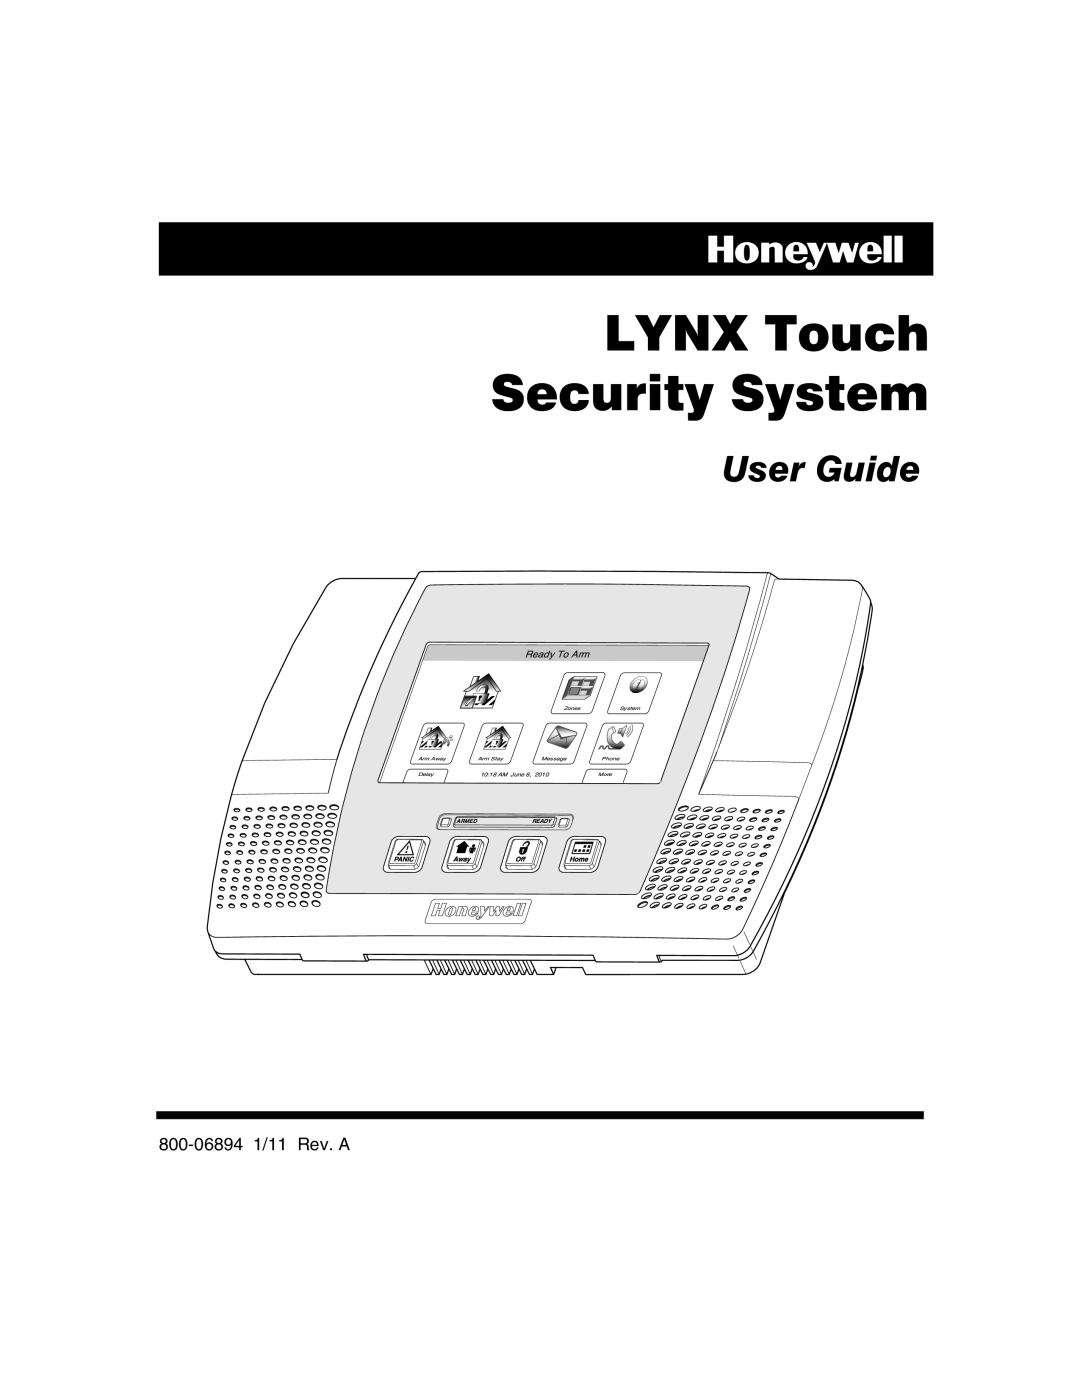 Honeywell 800-06894 manual LYNX Touch Security System, User Guide, Ready To Arm, Zones, Arm Away, Arm Stay, Message, Phone 